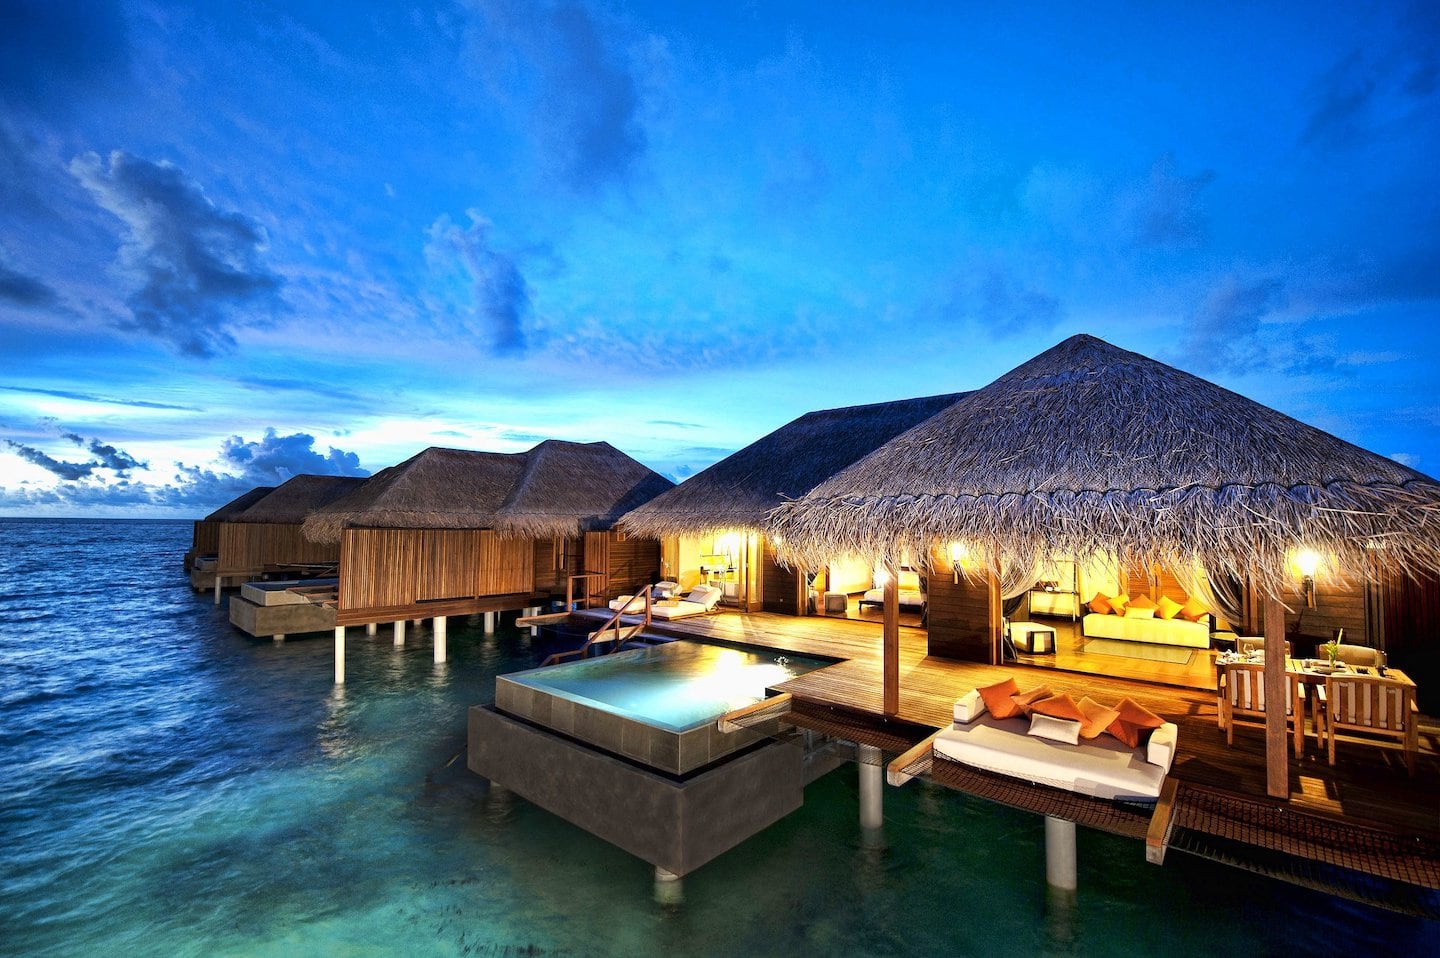 Caribbean overwater bungalow with pool at night